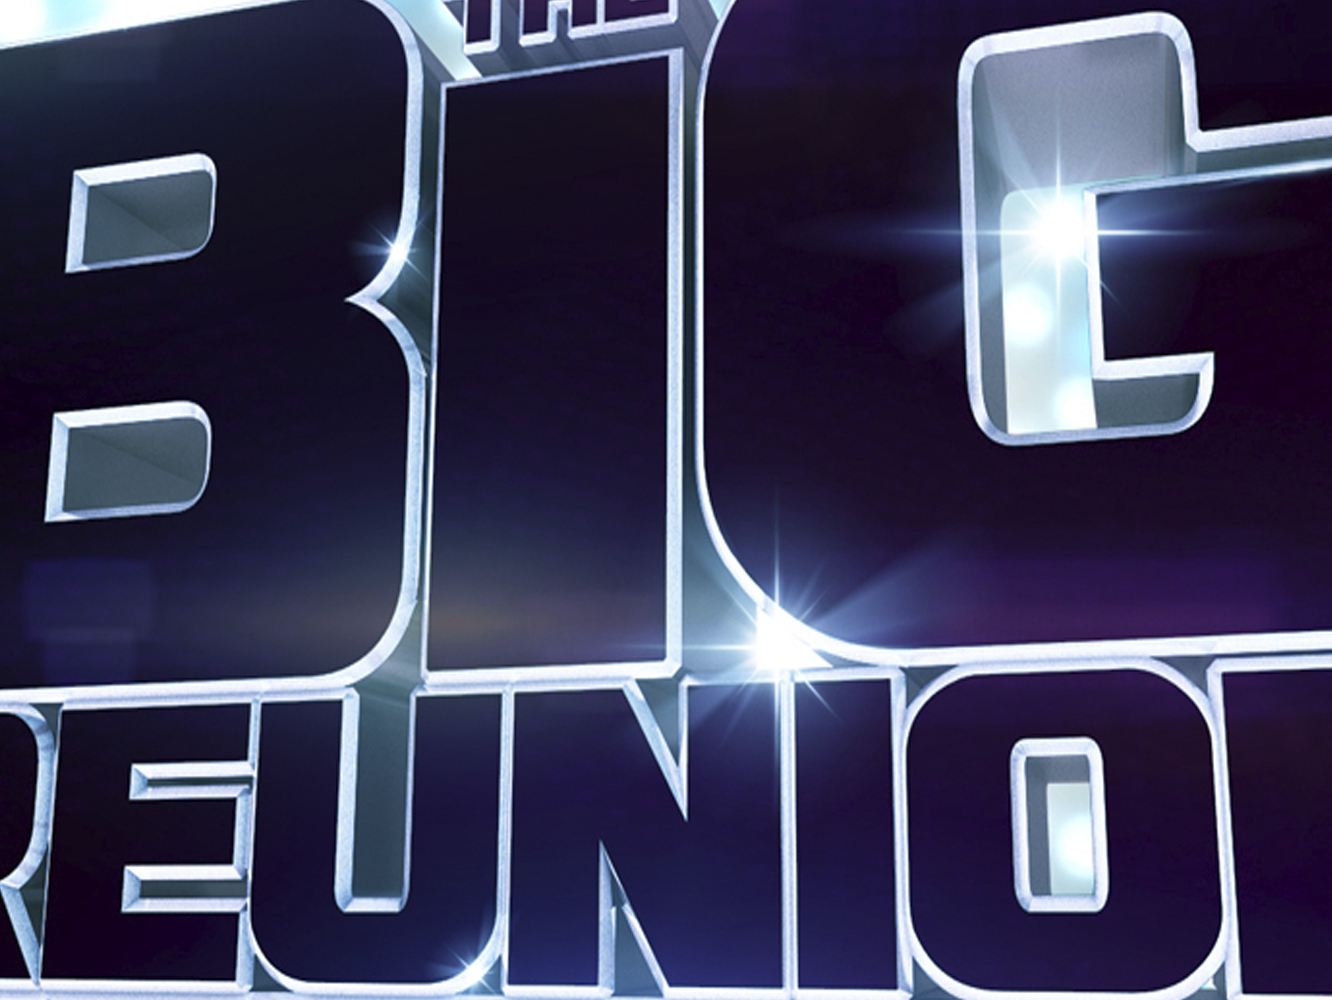  ¿Está Gestmusic montando un cruce entre ‘The Big Reunion’ y ‘Hit Me Baby One More Time’?